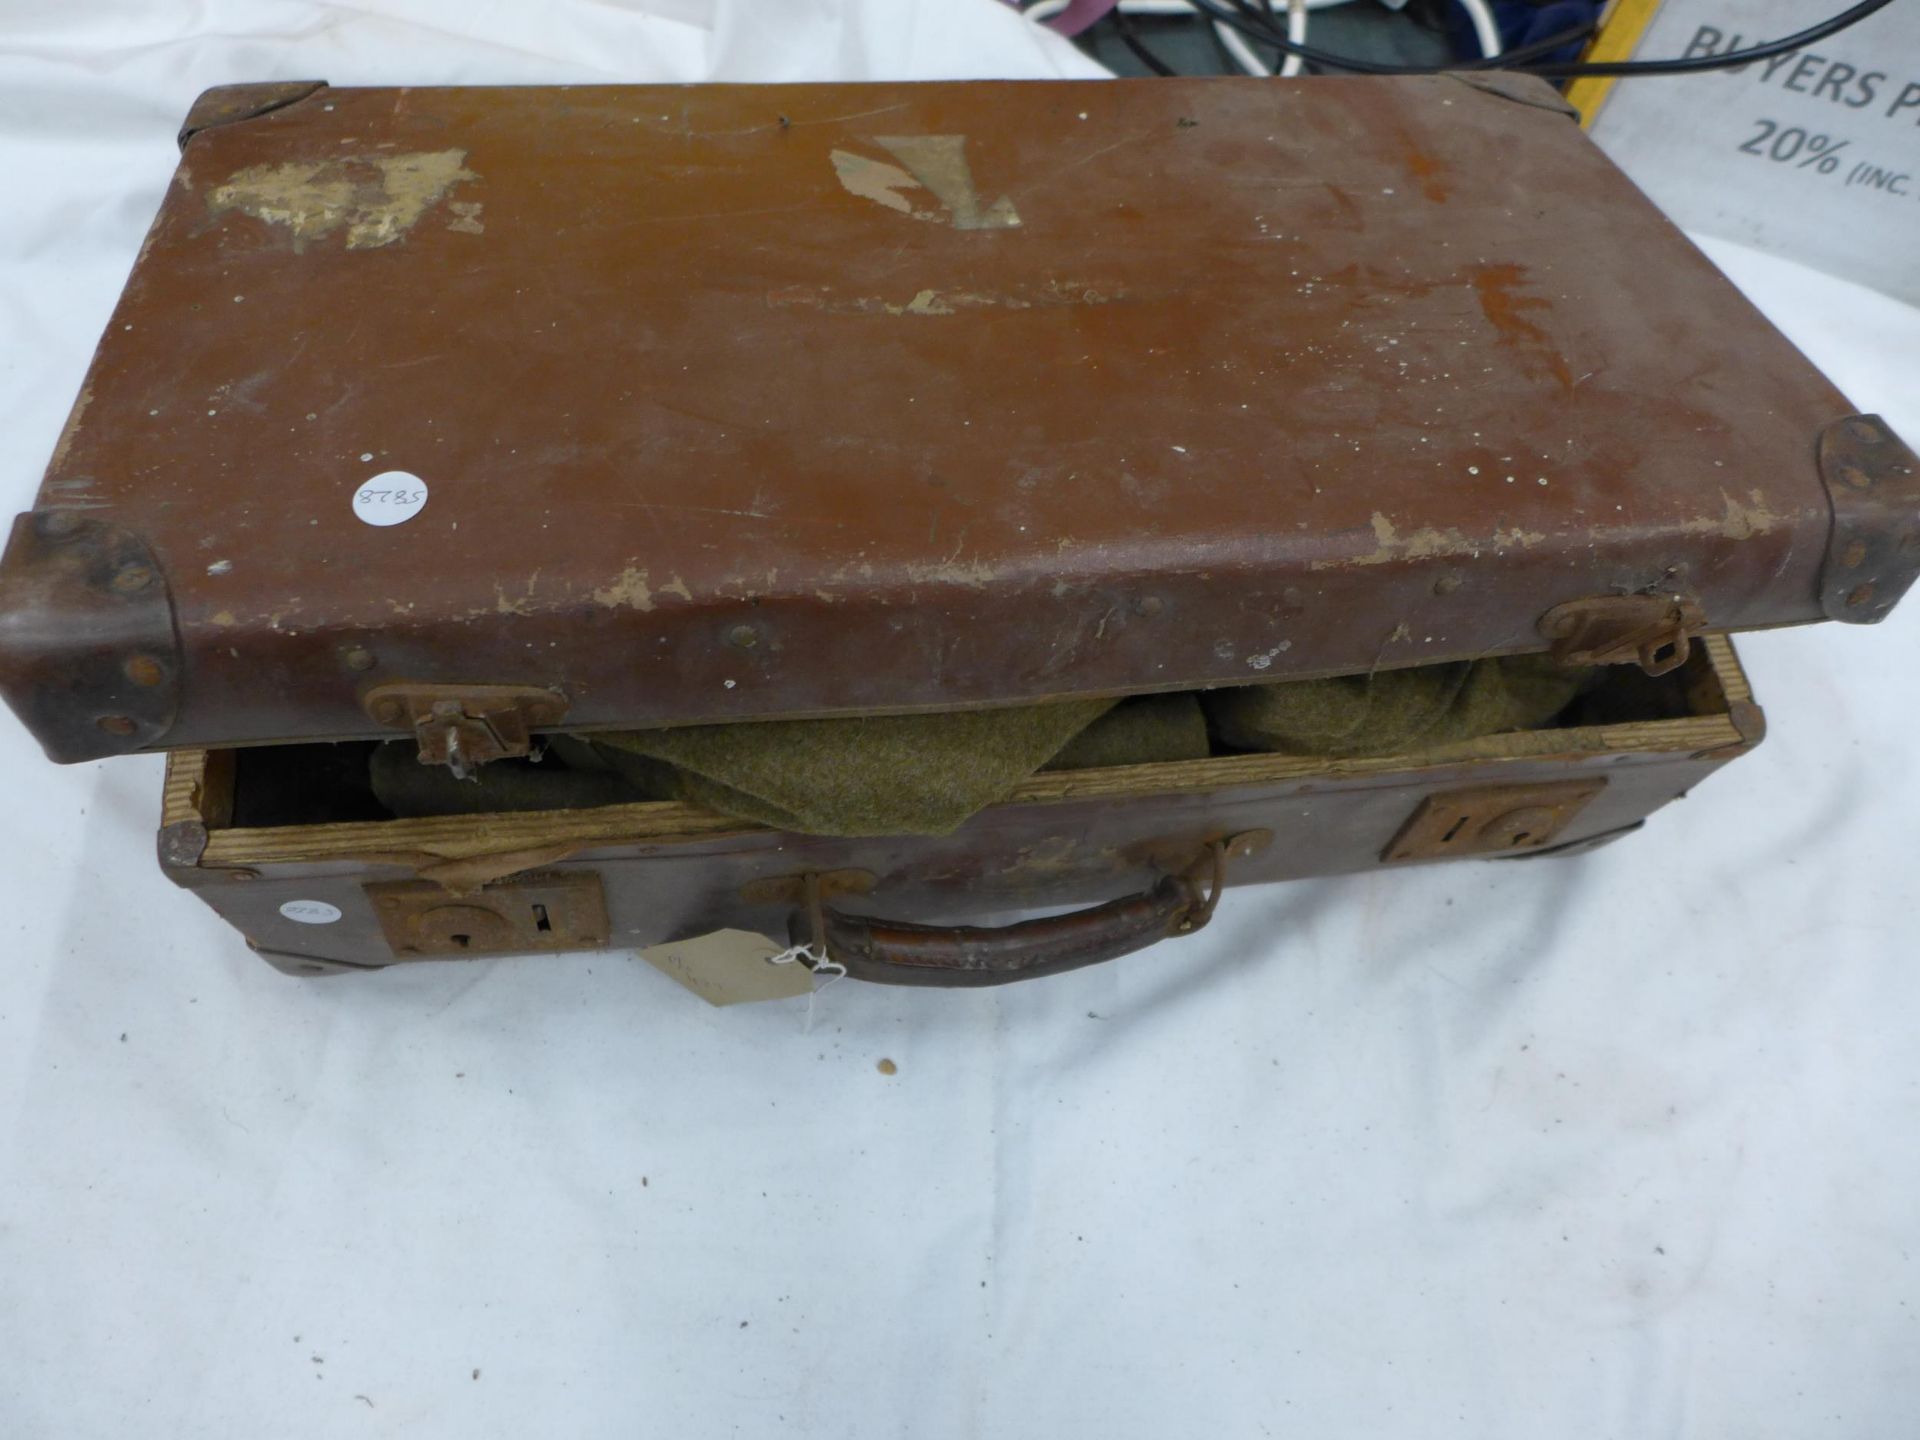 A BRITISH ARMY CORPORALS BATTLEDRESS, DATED 1946 AND A SUITCASE - Image 3 of 3